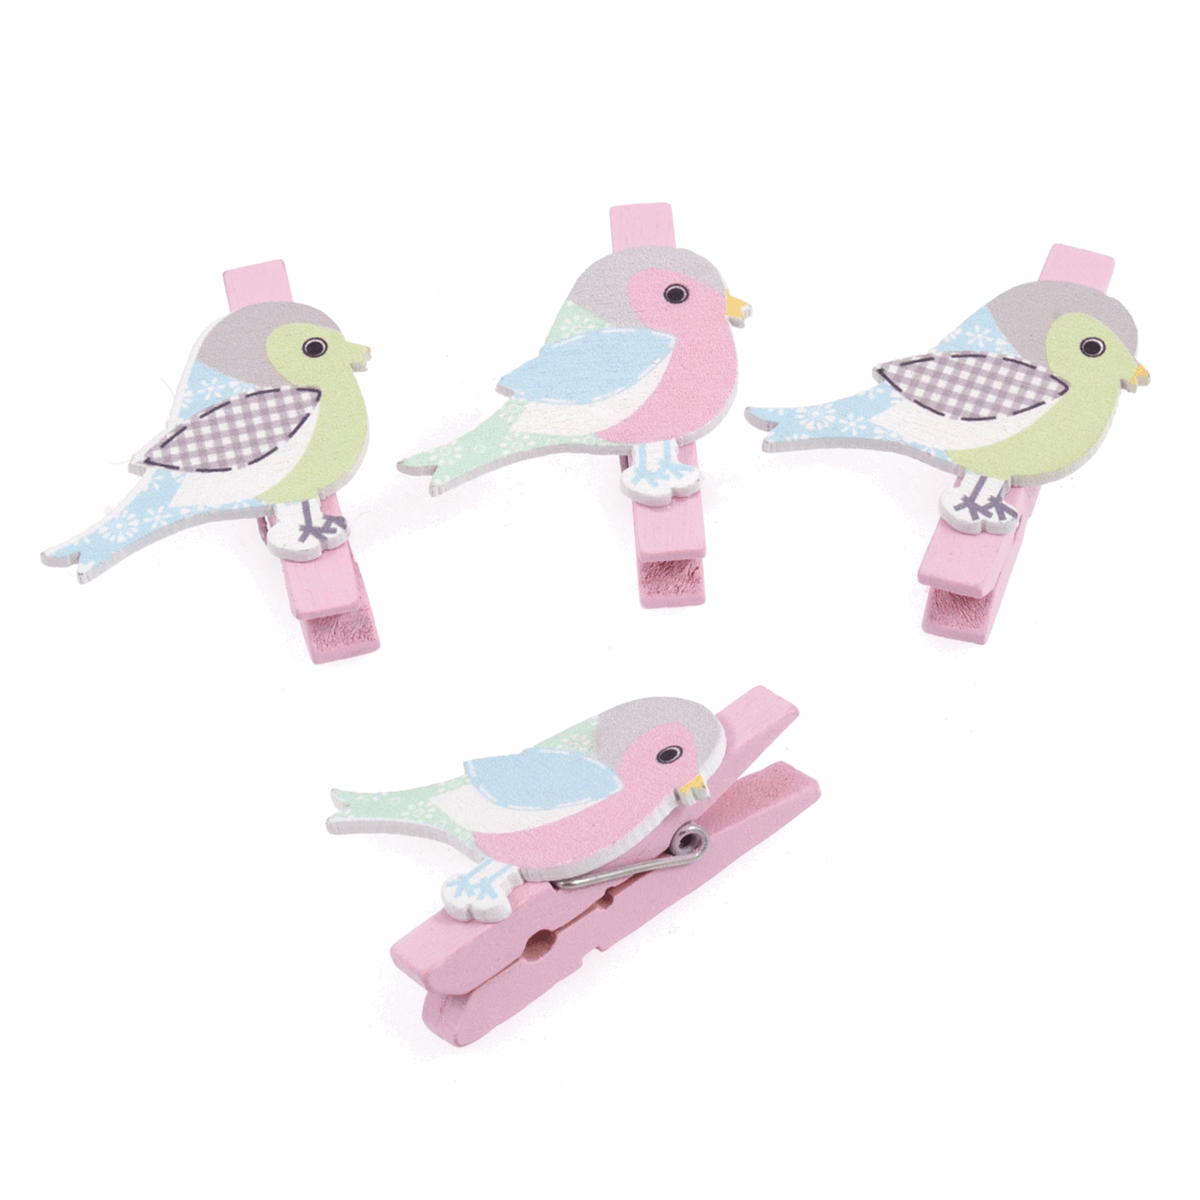 Trimits Wooden Bird Pegs - Pack of 4